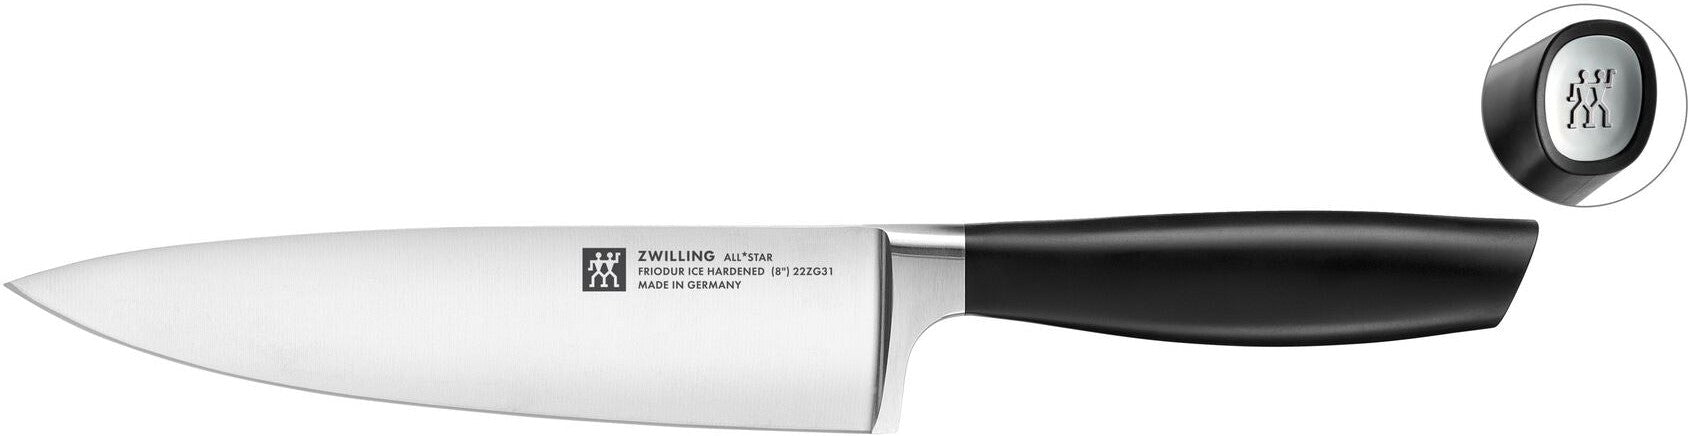 Zwilling - ALL * STAR 8" Chef's Knife Silver - 1020799